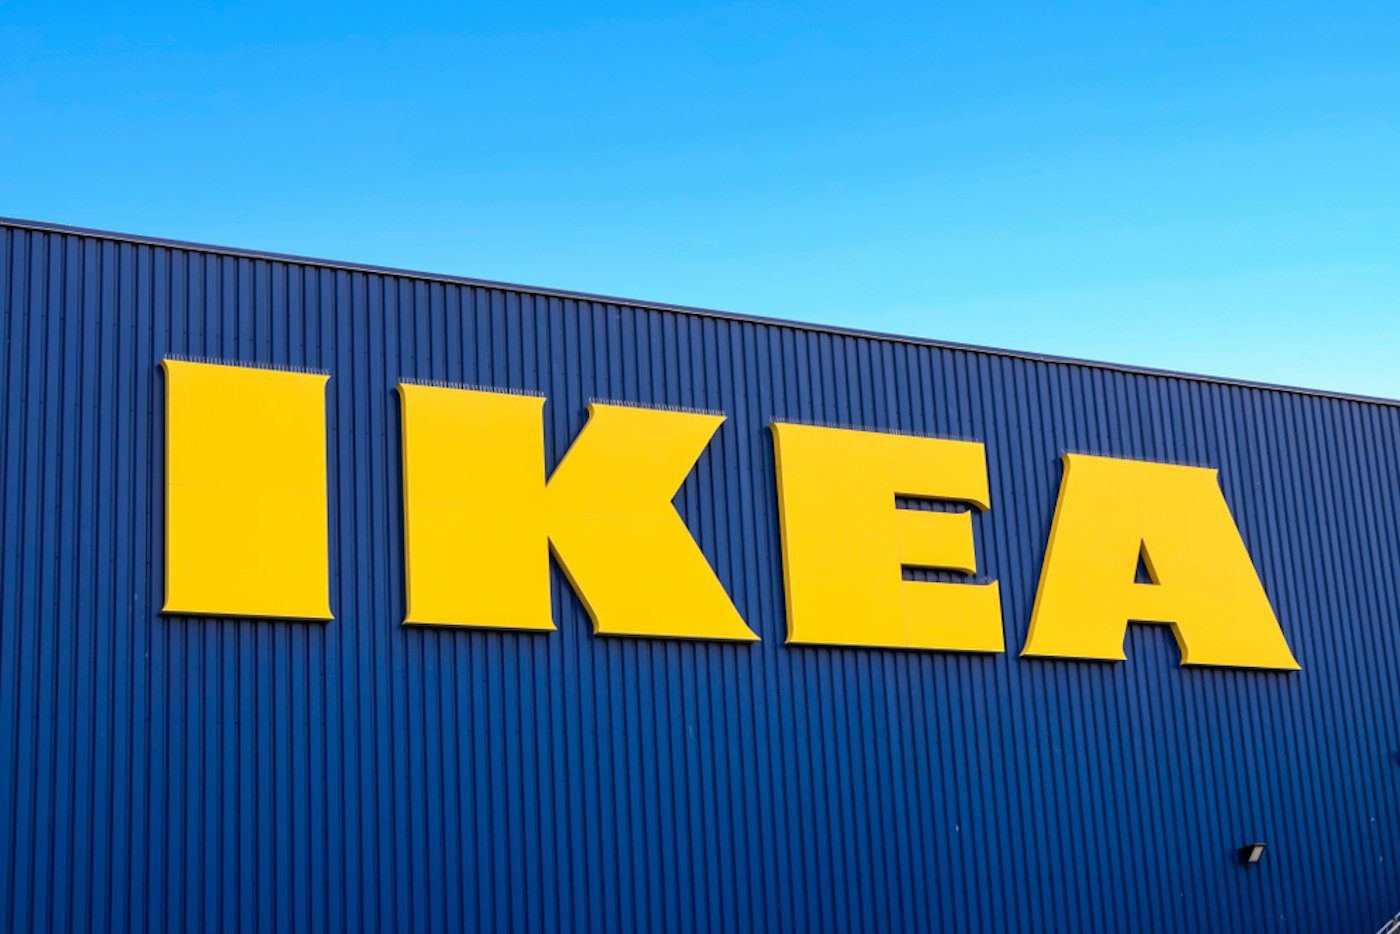 Yellow IKEA sign on blue building with blue sky in background